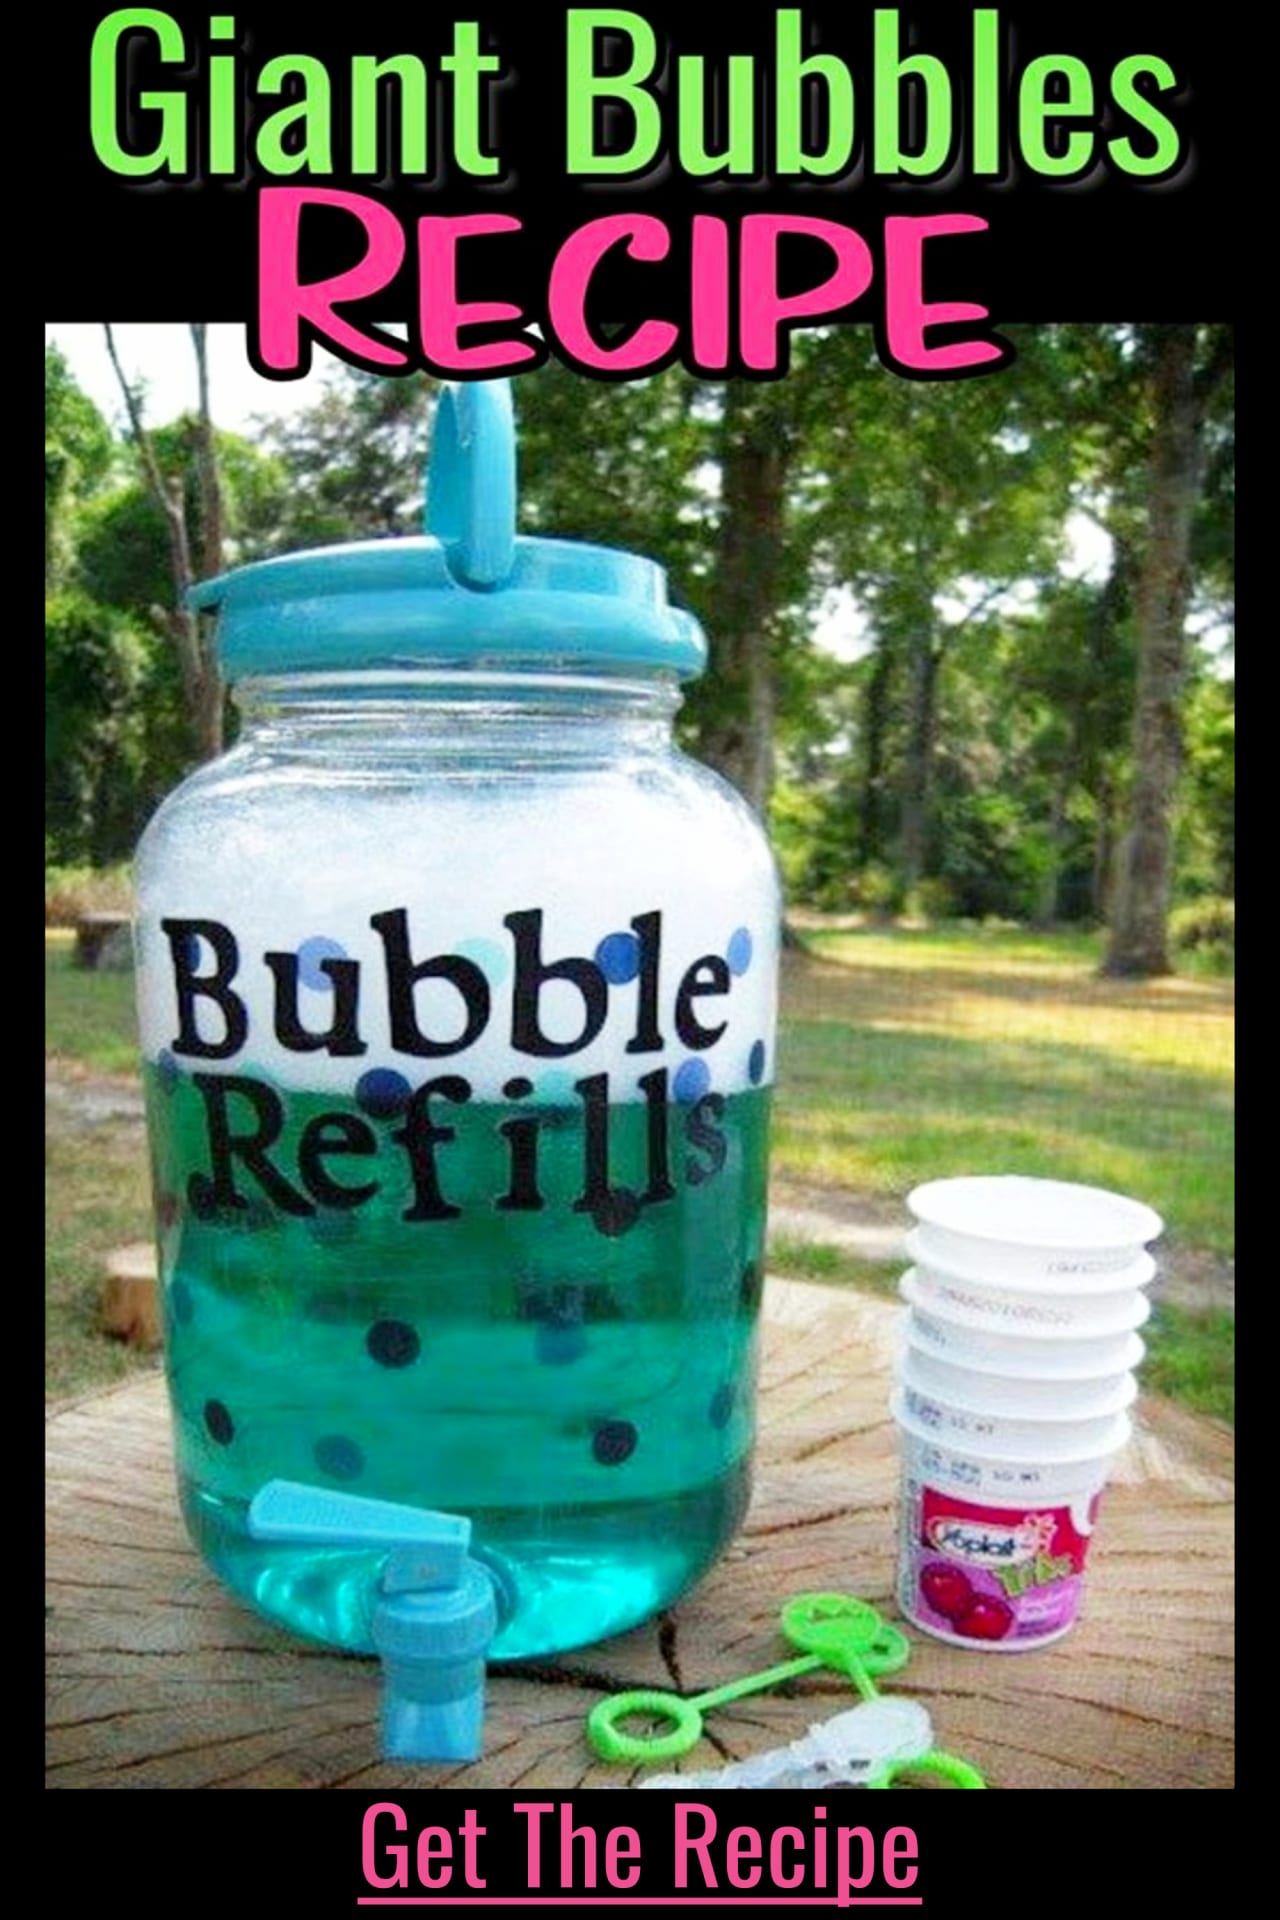 bubbles refill station - Bubbles Recipes to make homemade bubbles - summer party activities for kids - fun activity ideas for kids - cookout or block party activities for kids -  